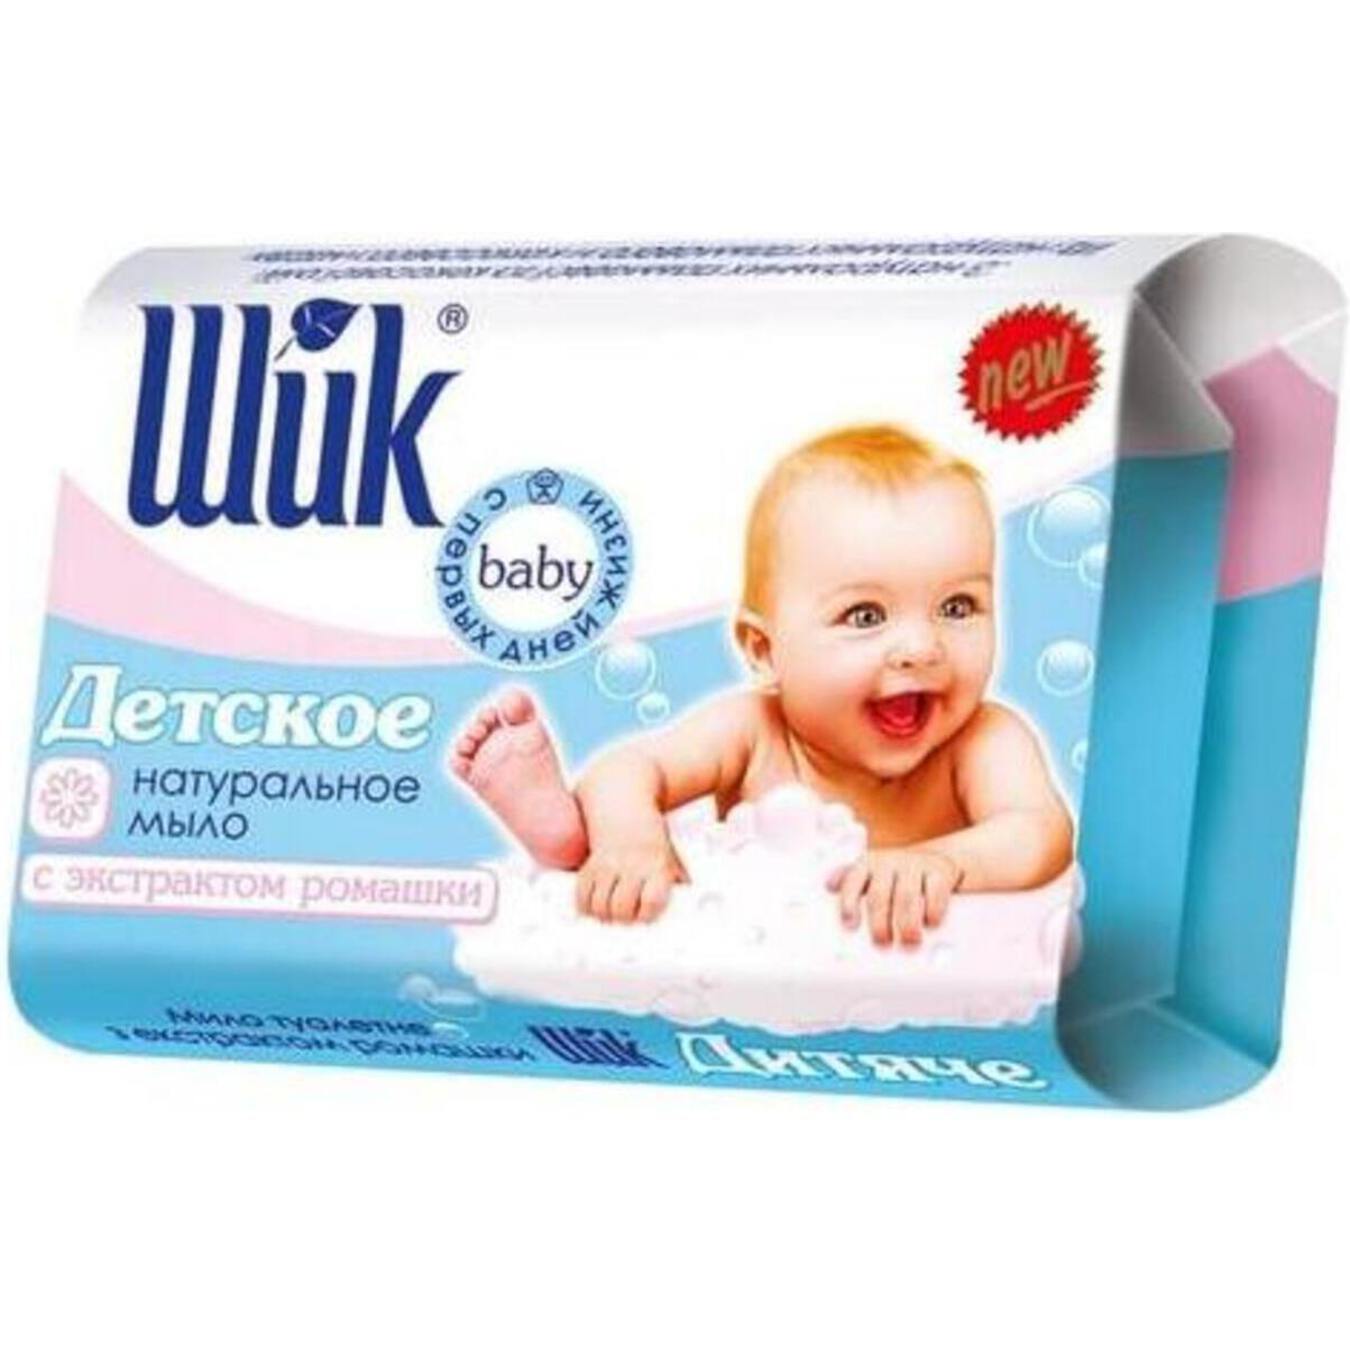 Shik Soap with Chamomile Extract for Children 70g